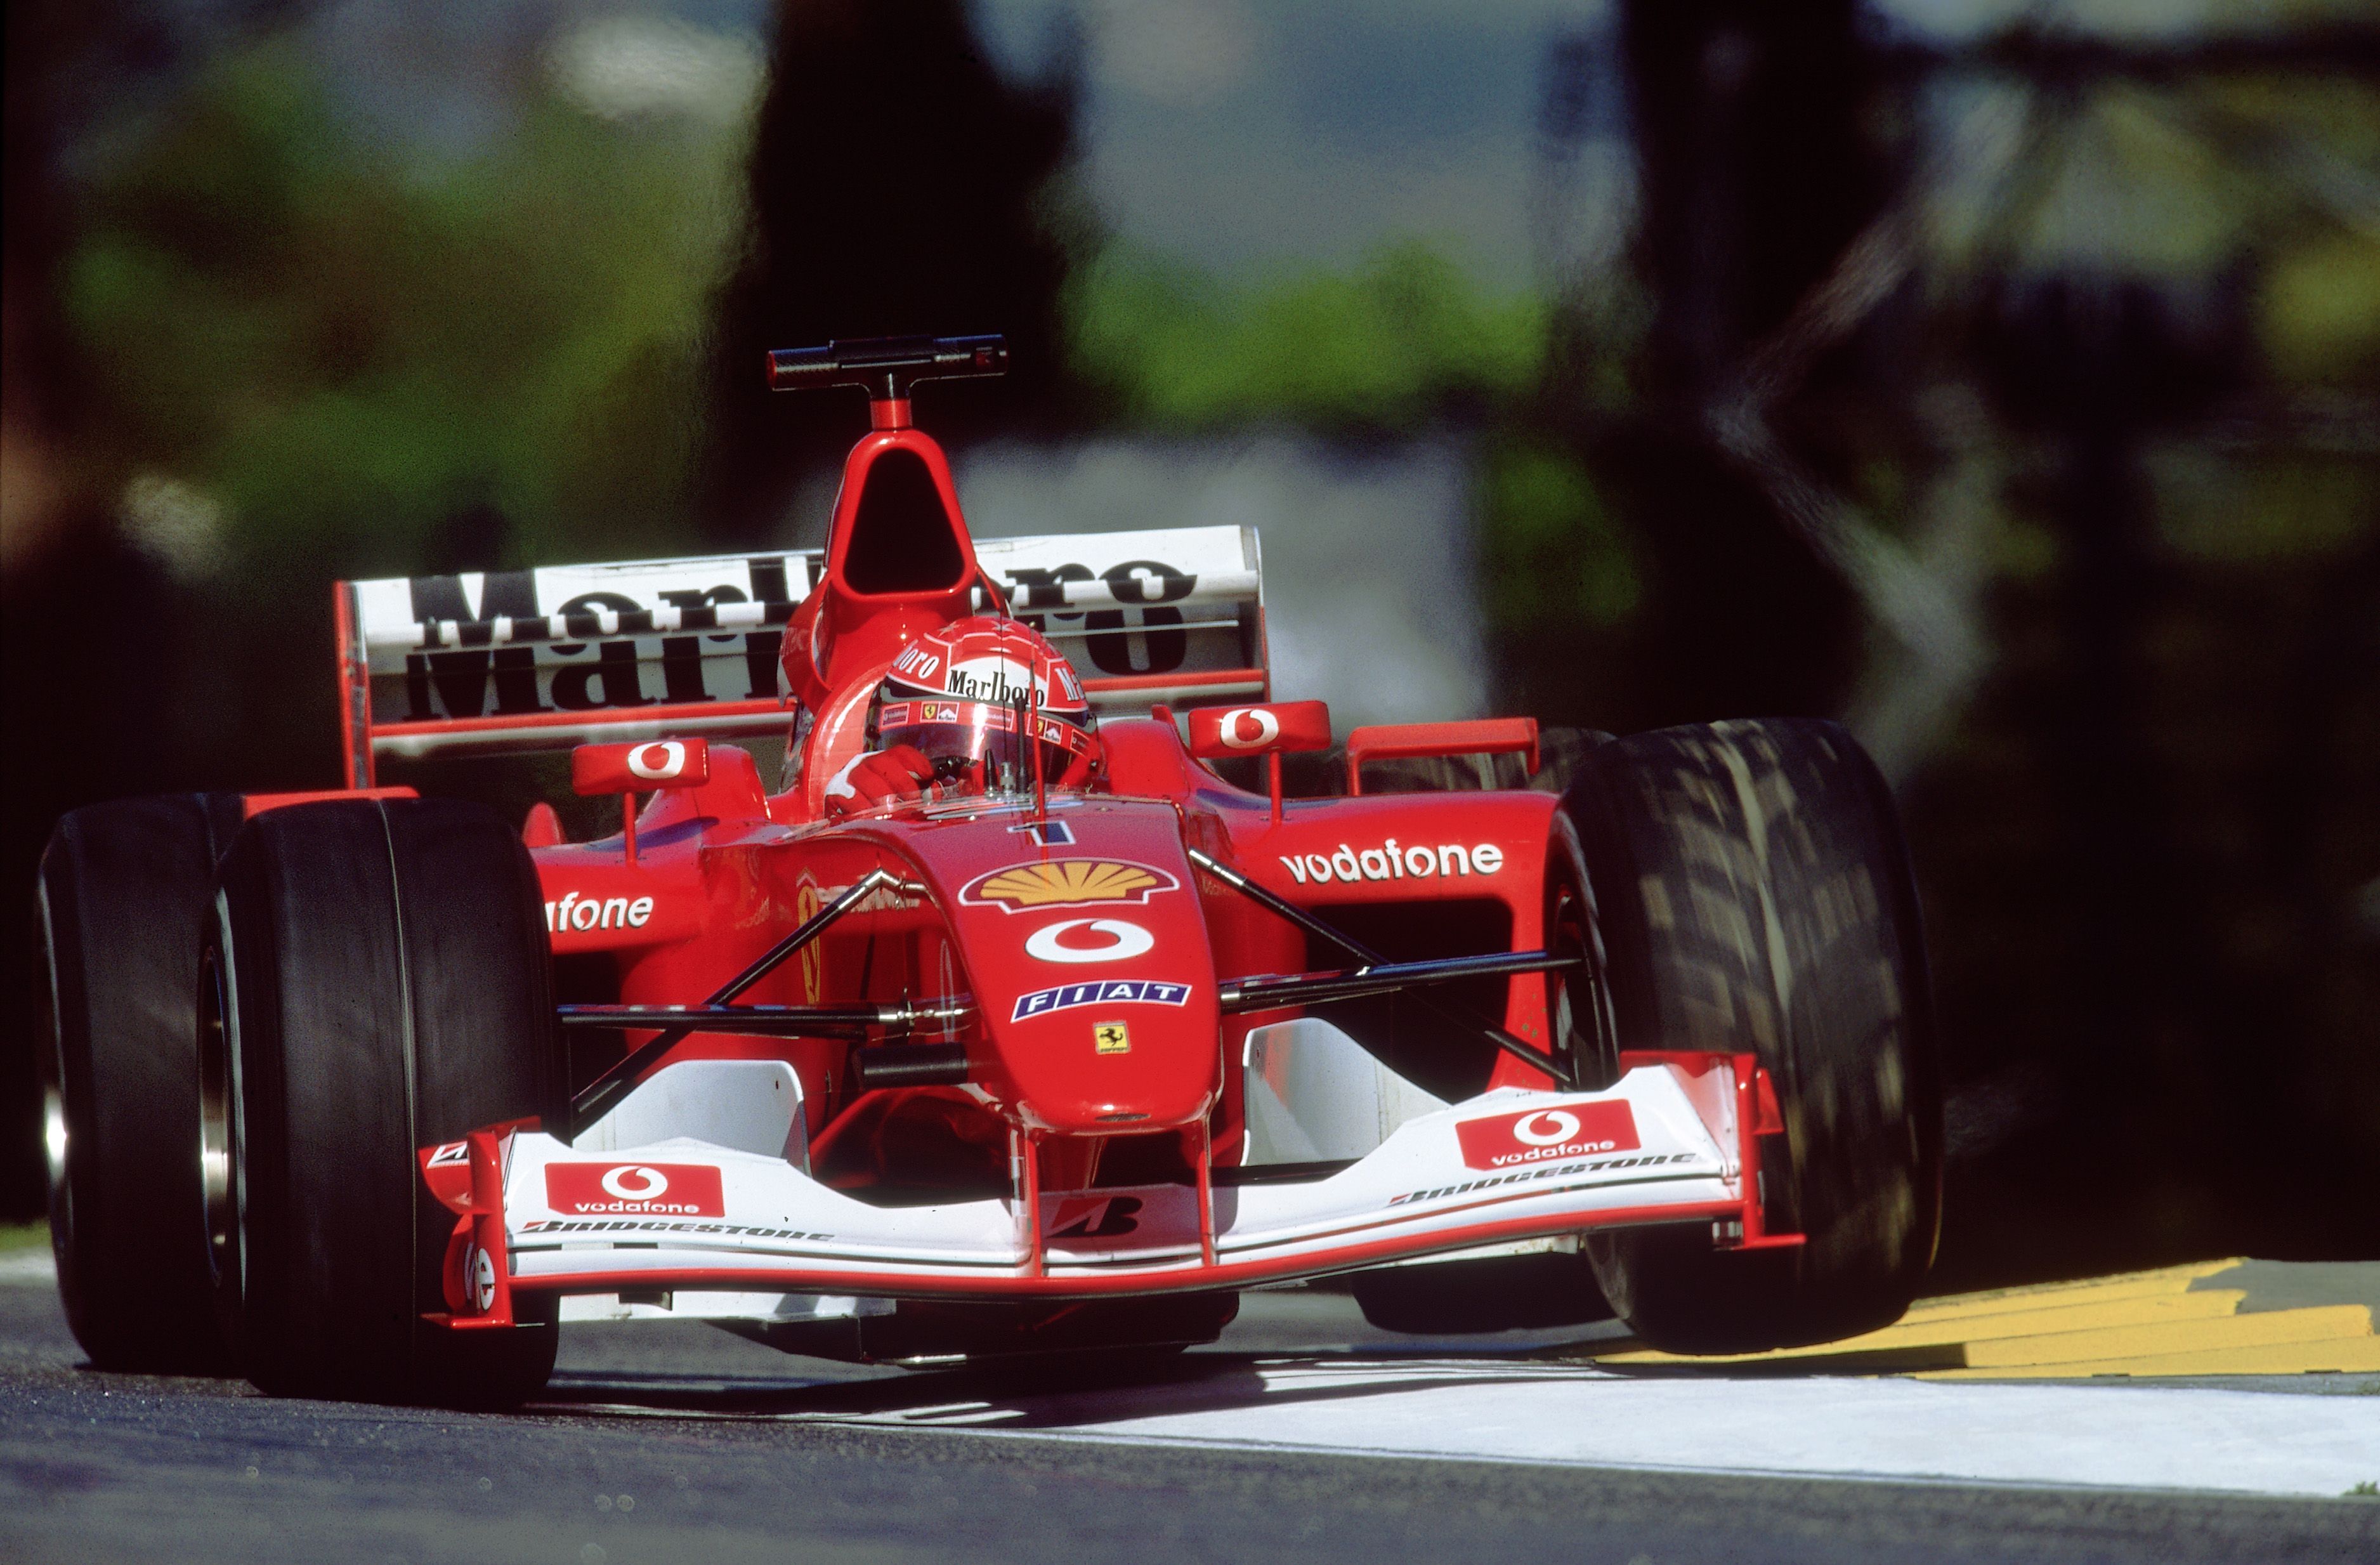 F1: One of Michael Schumacher's Ferraris has sold for almost $15